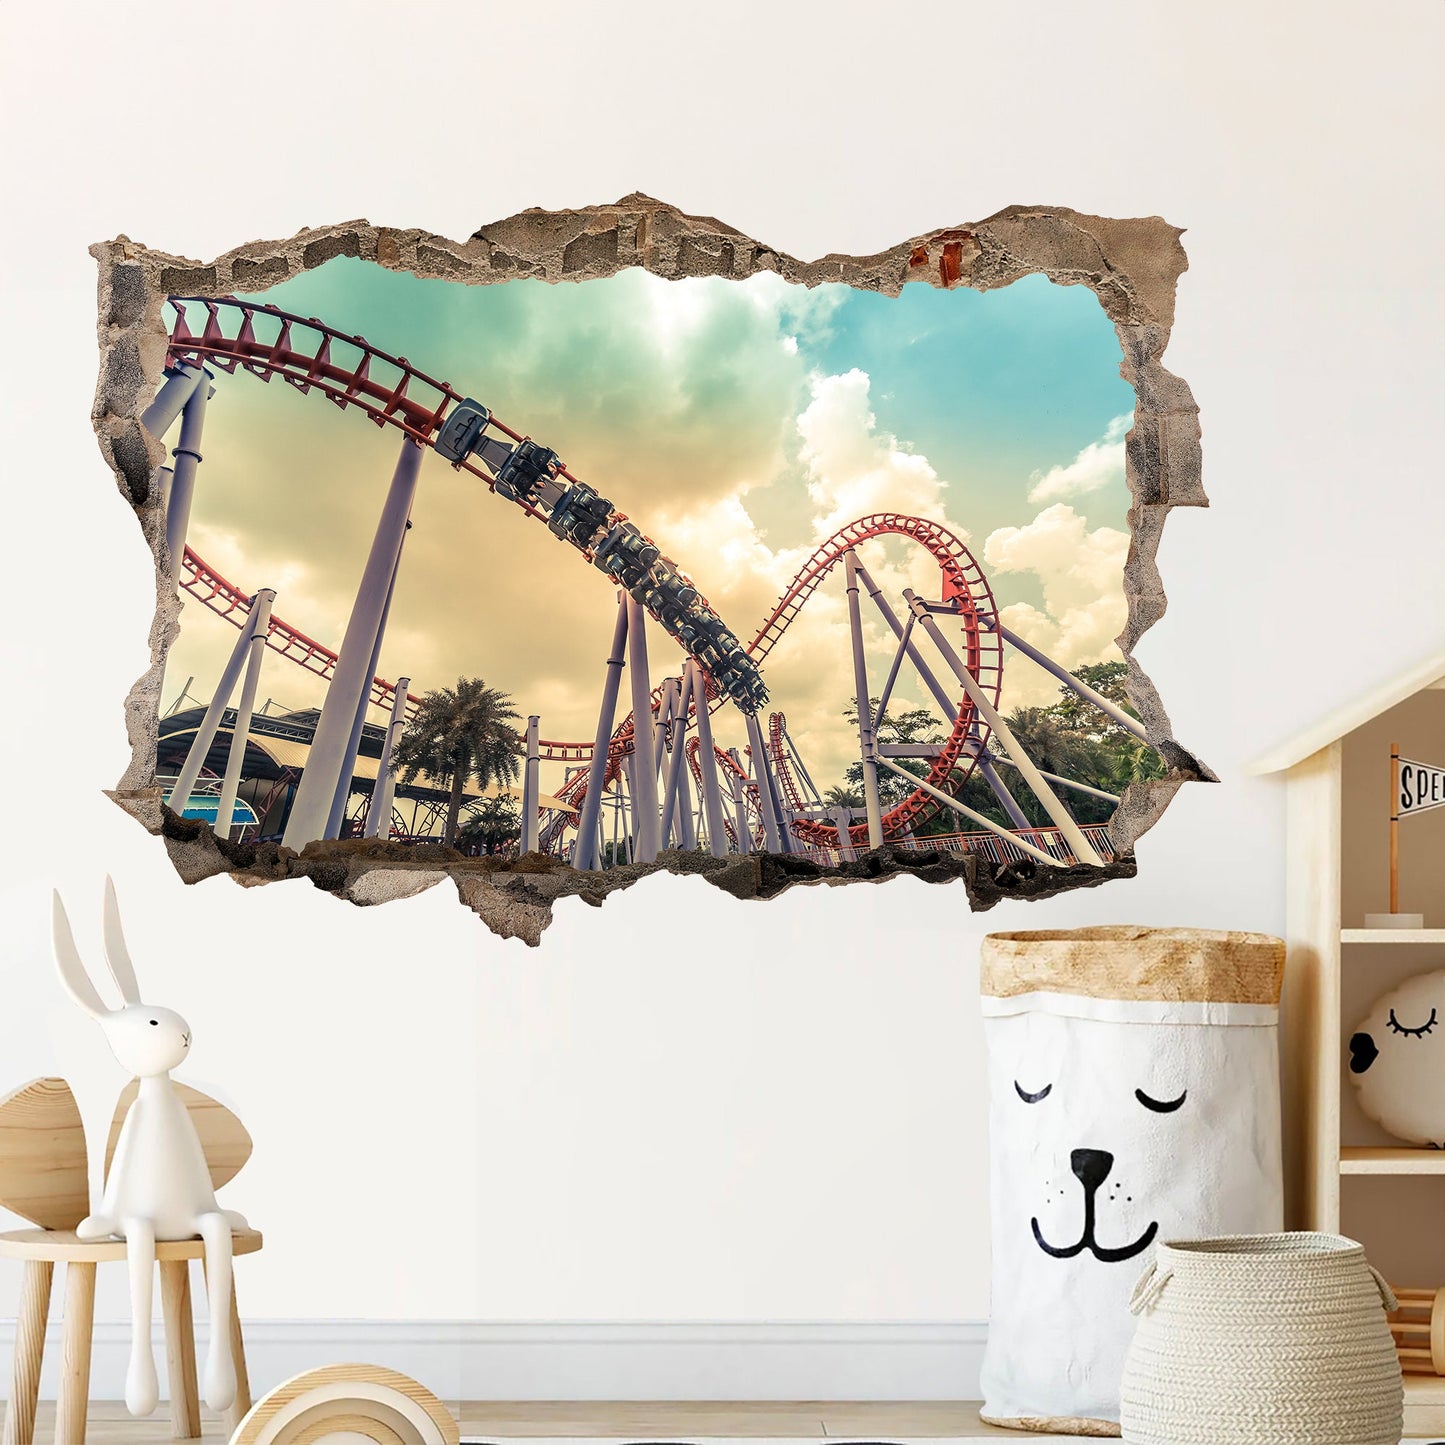 Thrilling Coaster Escape 3D Broken Wall Decal - Removable Peel and Stick - BW006